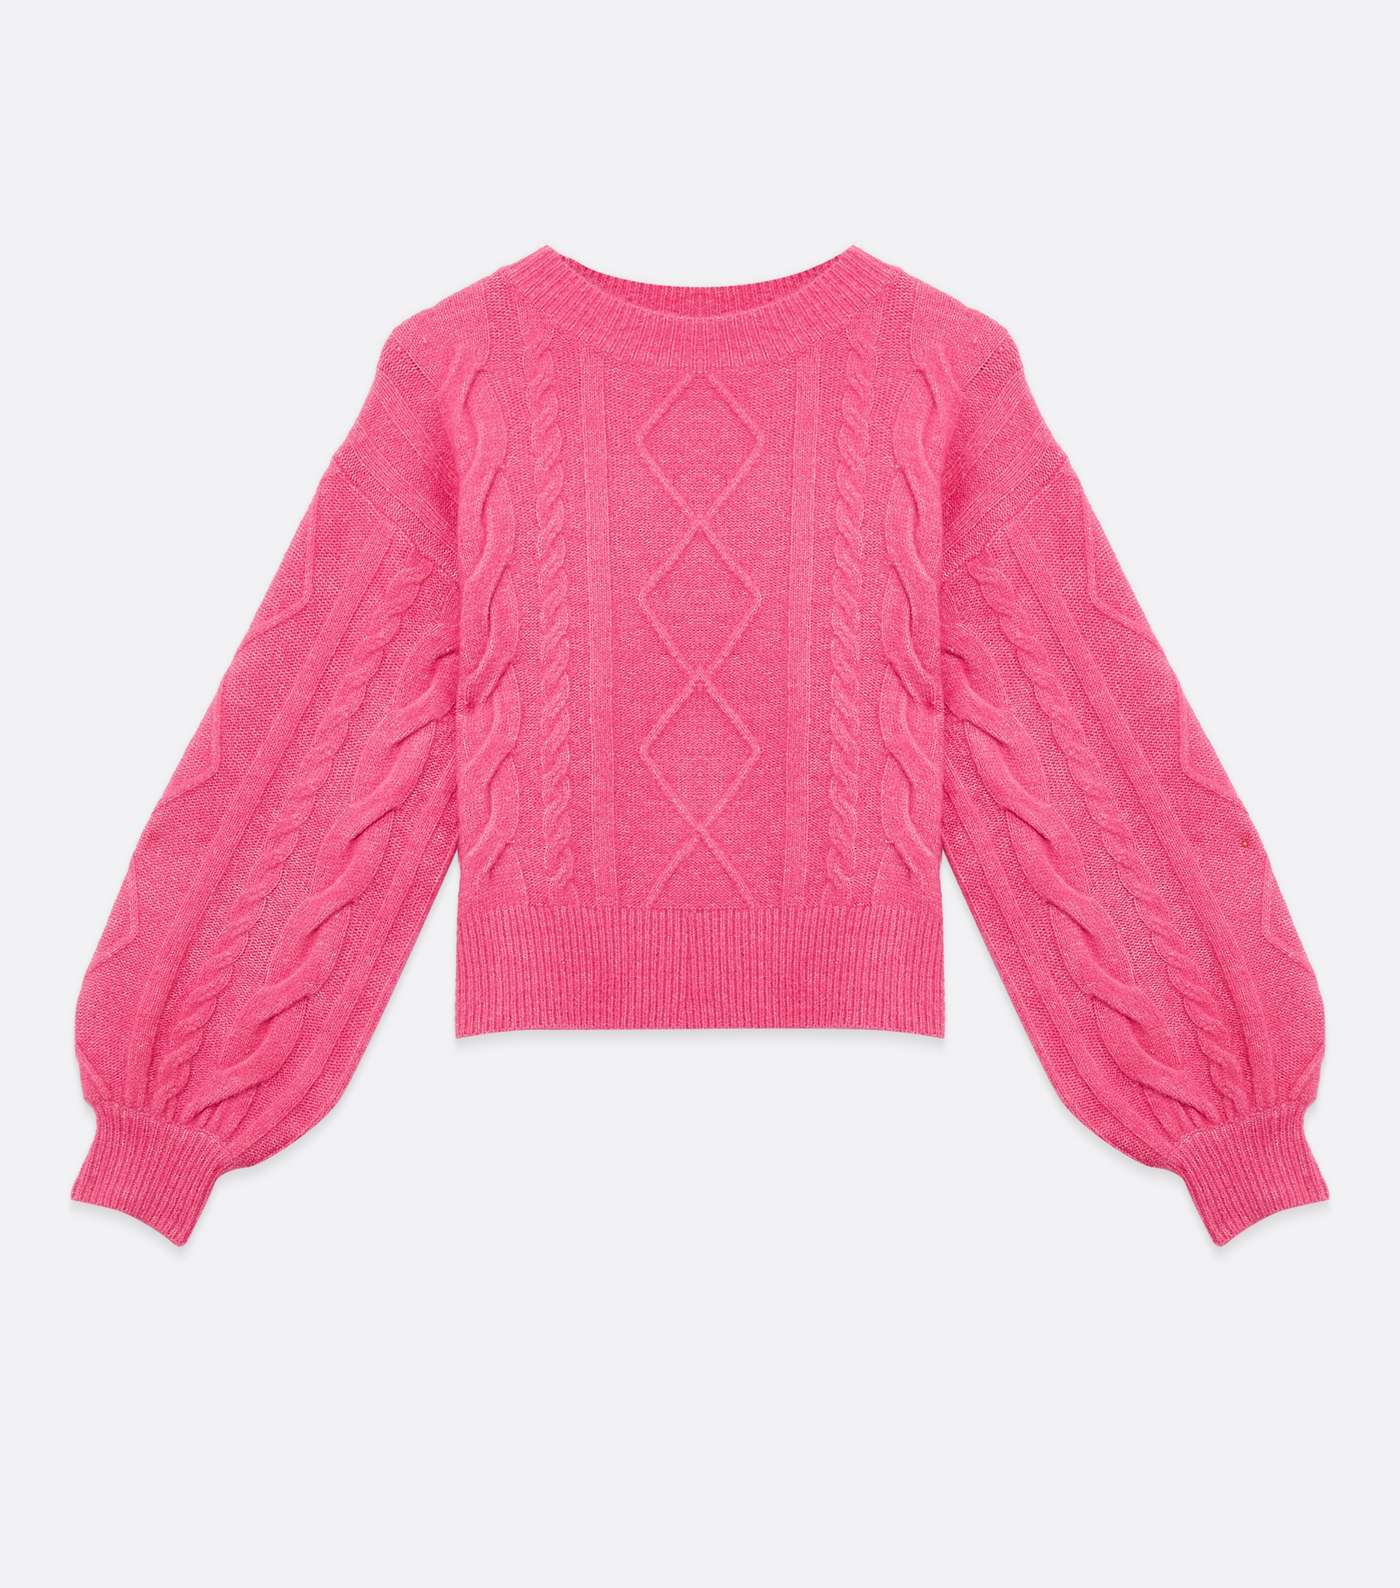 Sunshine Soul Bright Pink Cable Knit Puff Sleeve Jumper Image 5